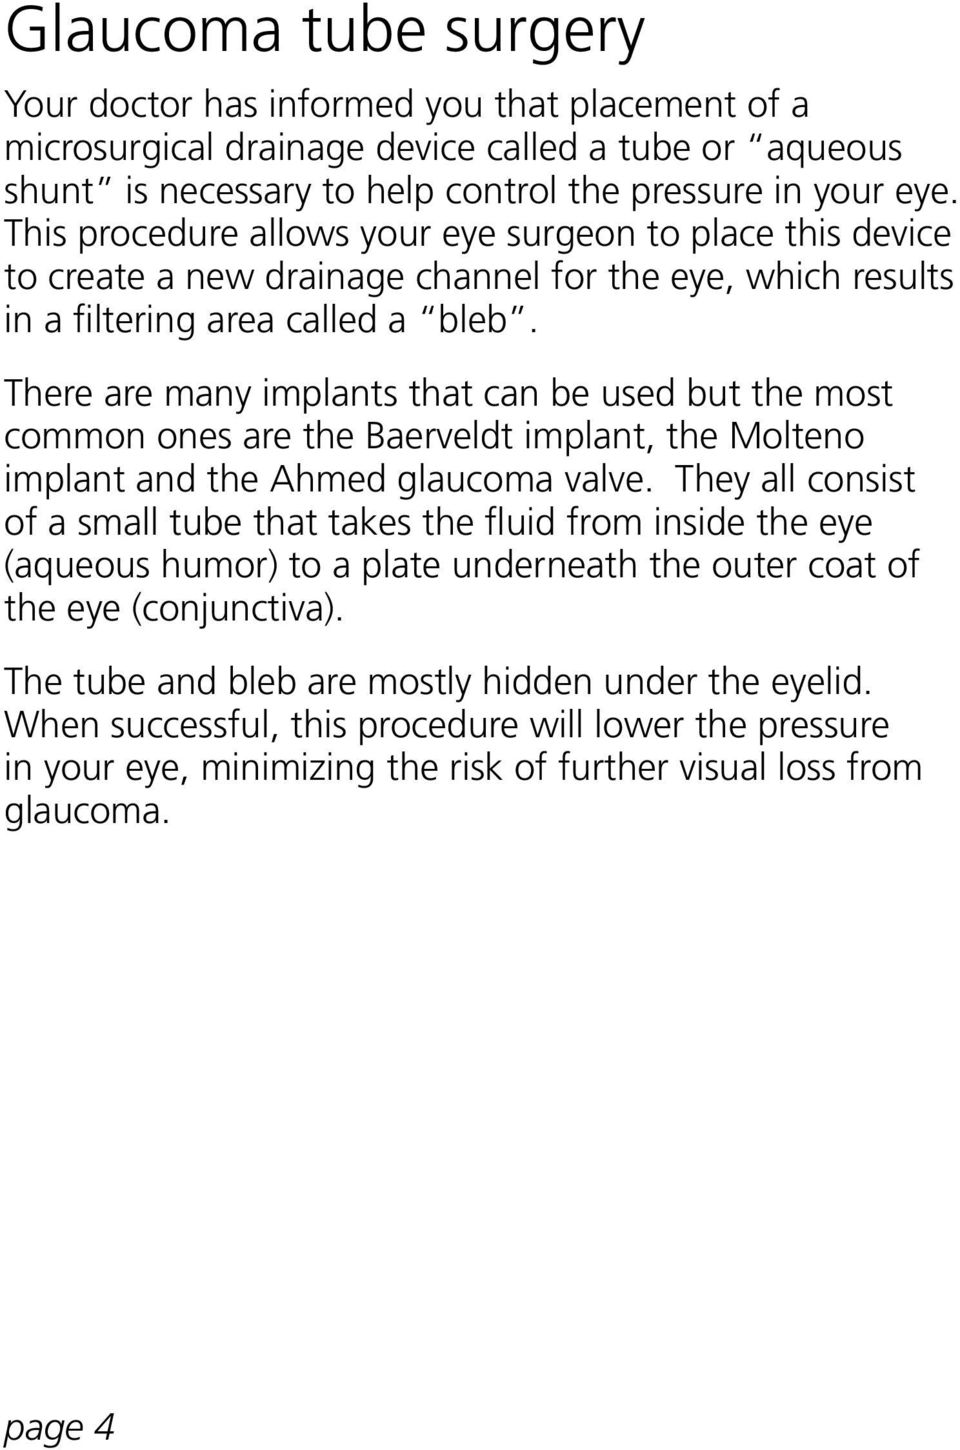 There are many implants that can be used but the most common ones are the Baerveldt implant, the Molteno implant and the Ahmed glaucoma valve.